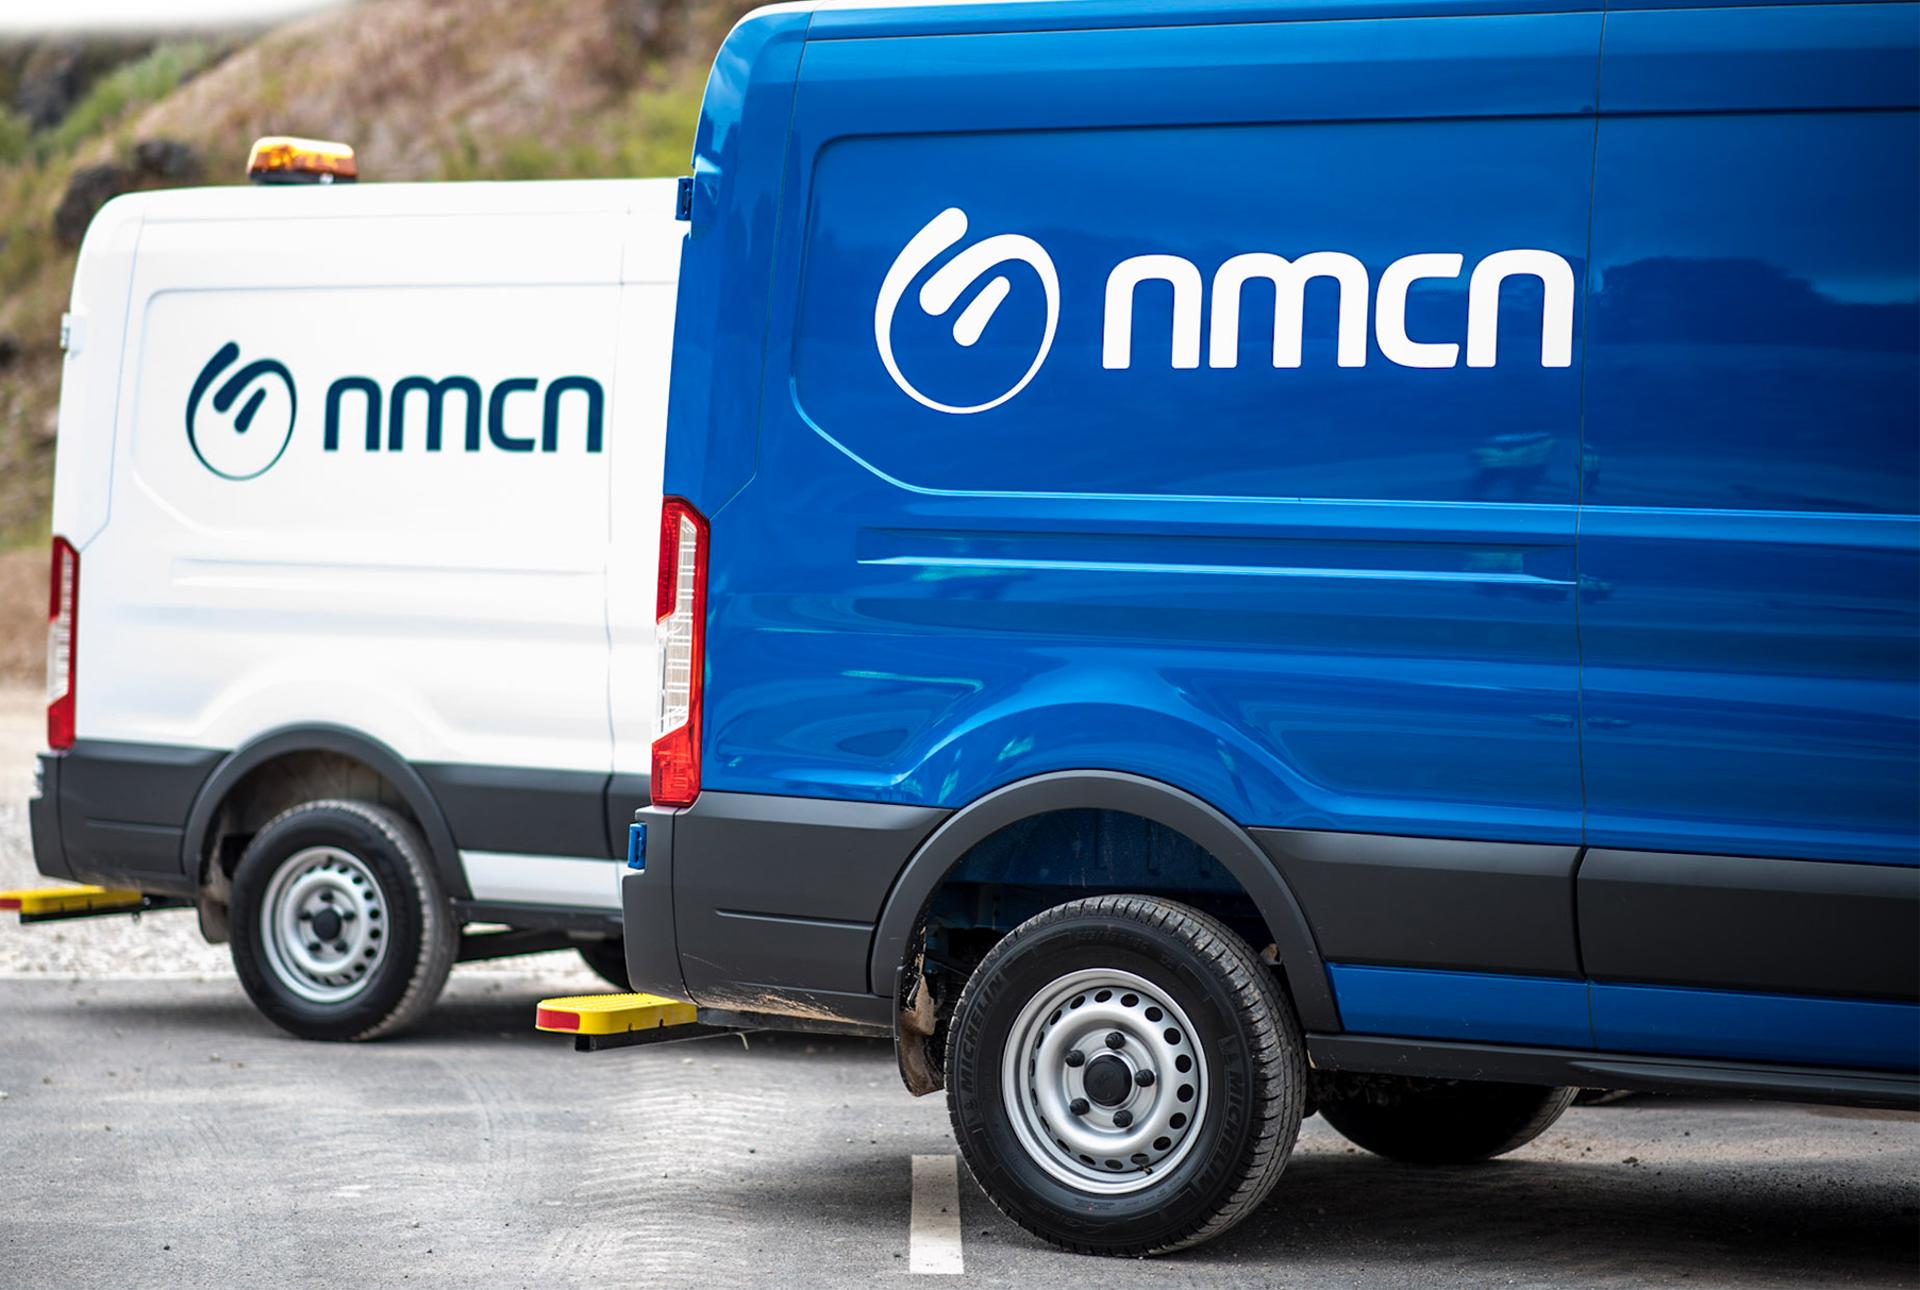 Administrators seek acquirer as NMCN falls into administration